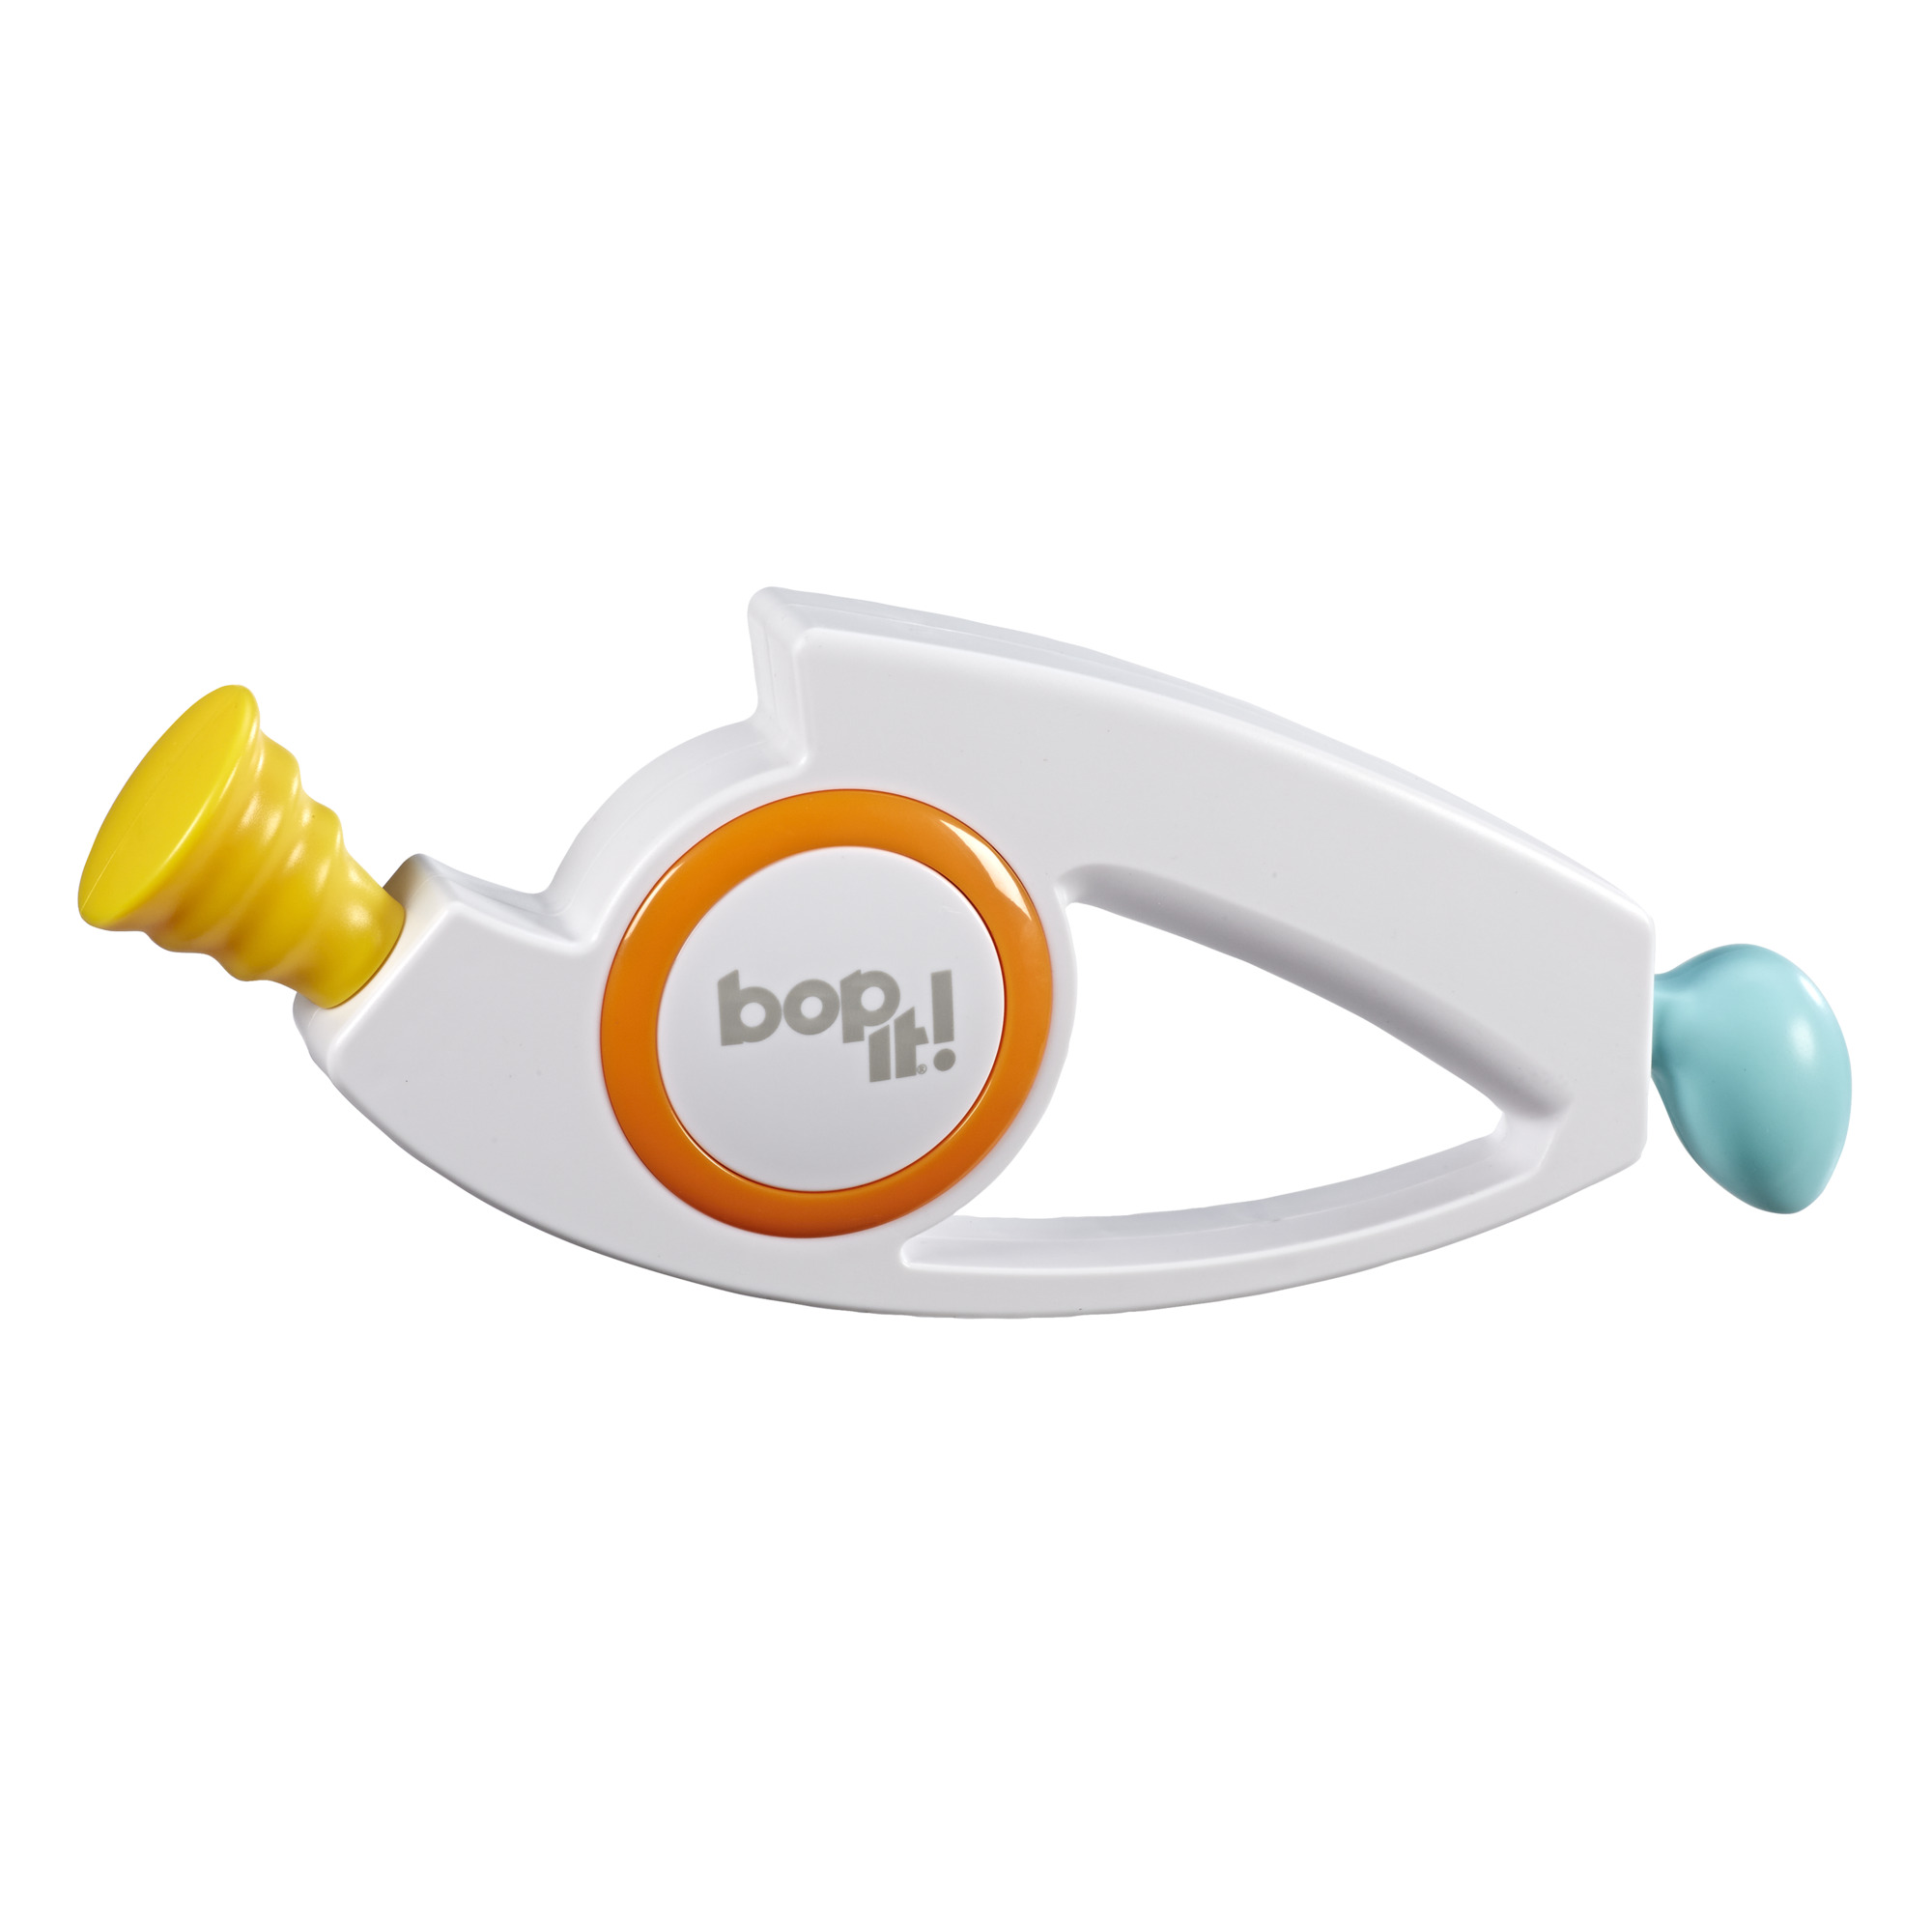 Bop It! The Classic Game of Bop It Pull It Twist It for Kids and Family Ages 8 and Up, 1+ Player - image 3 of 12